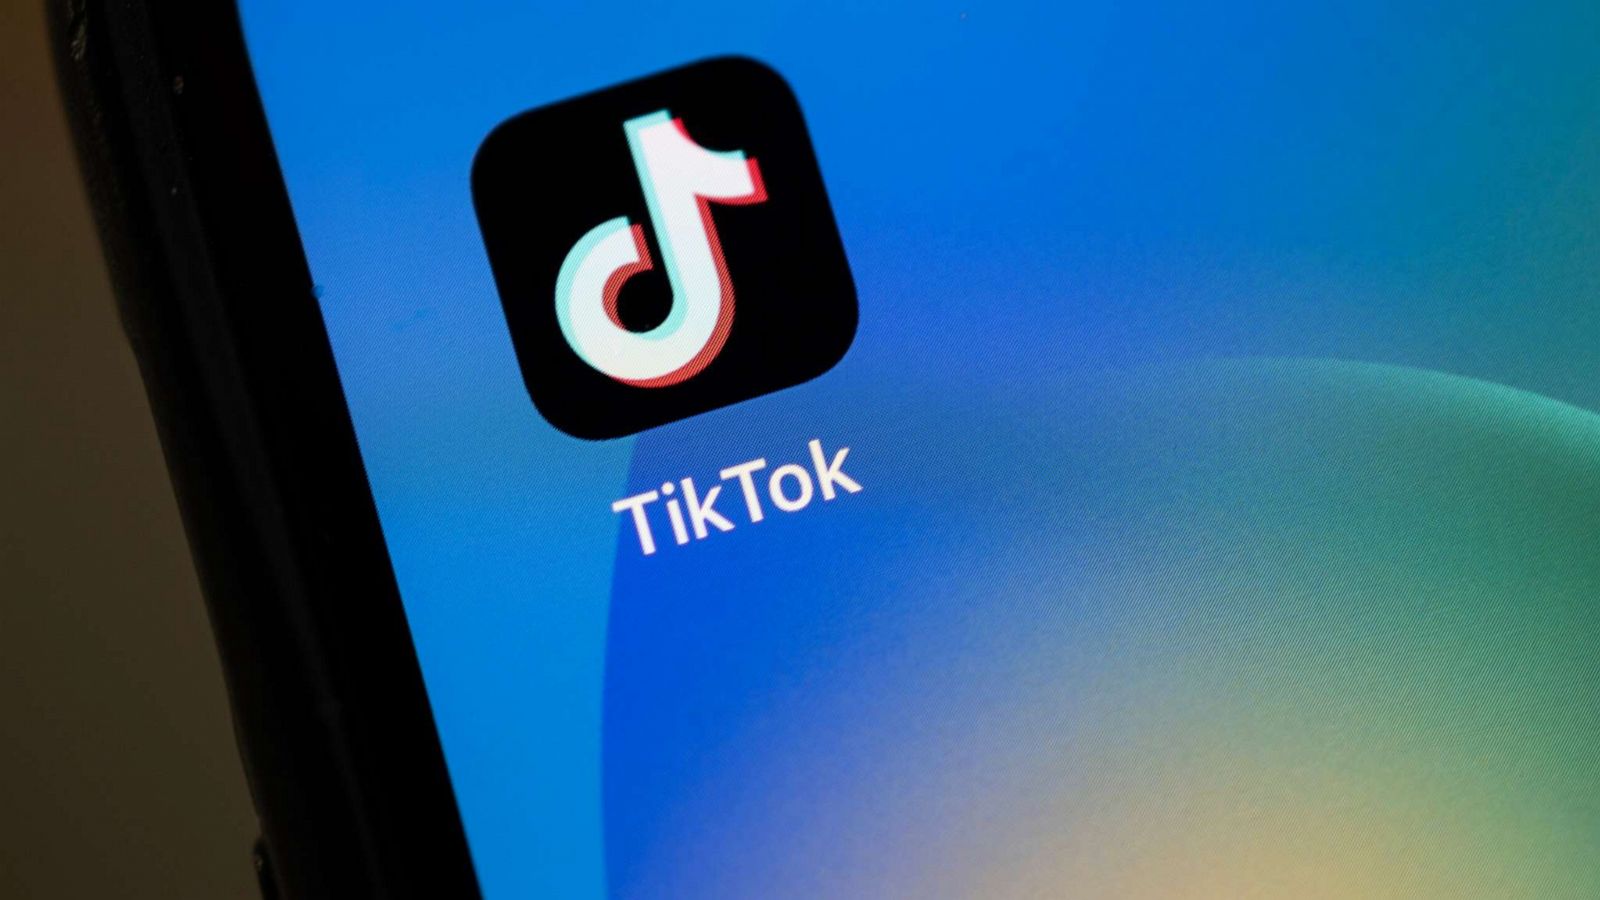 Why are governments cracking down on TikTok?, Social Media News